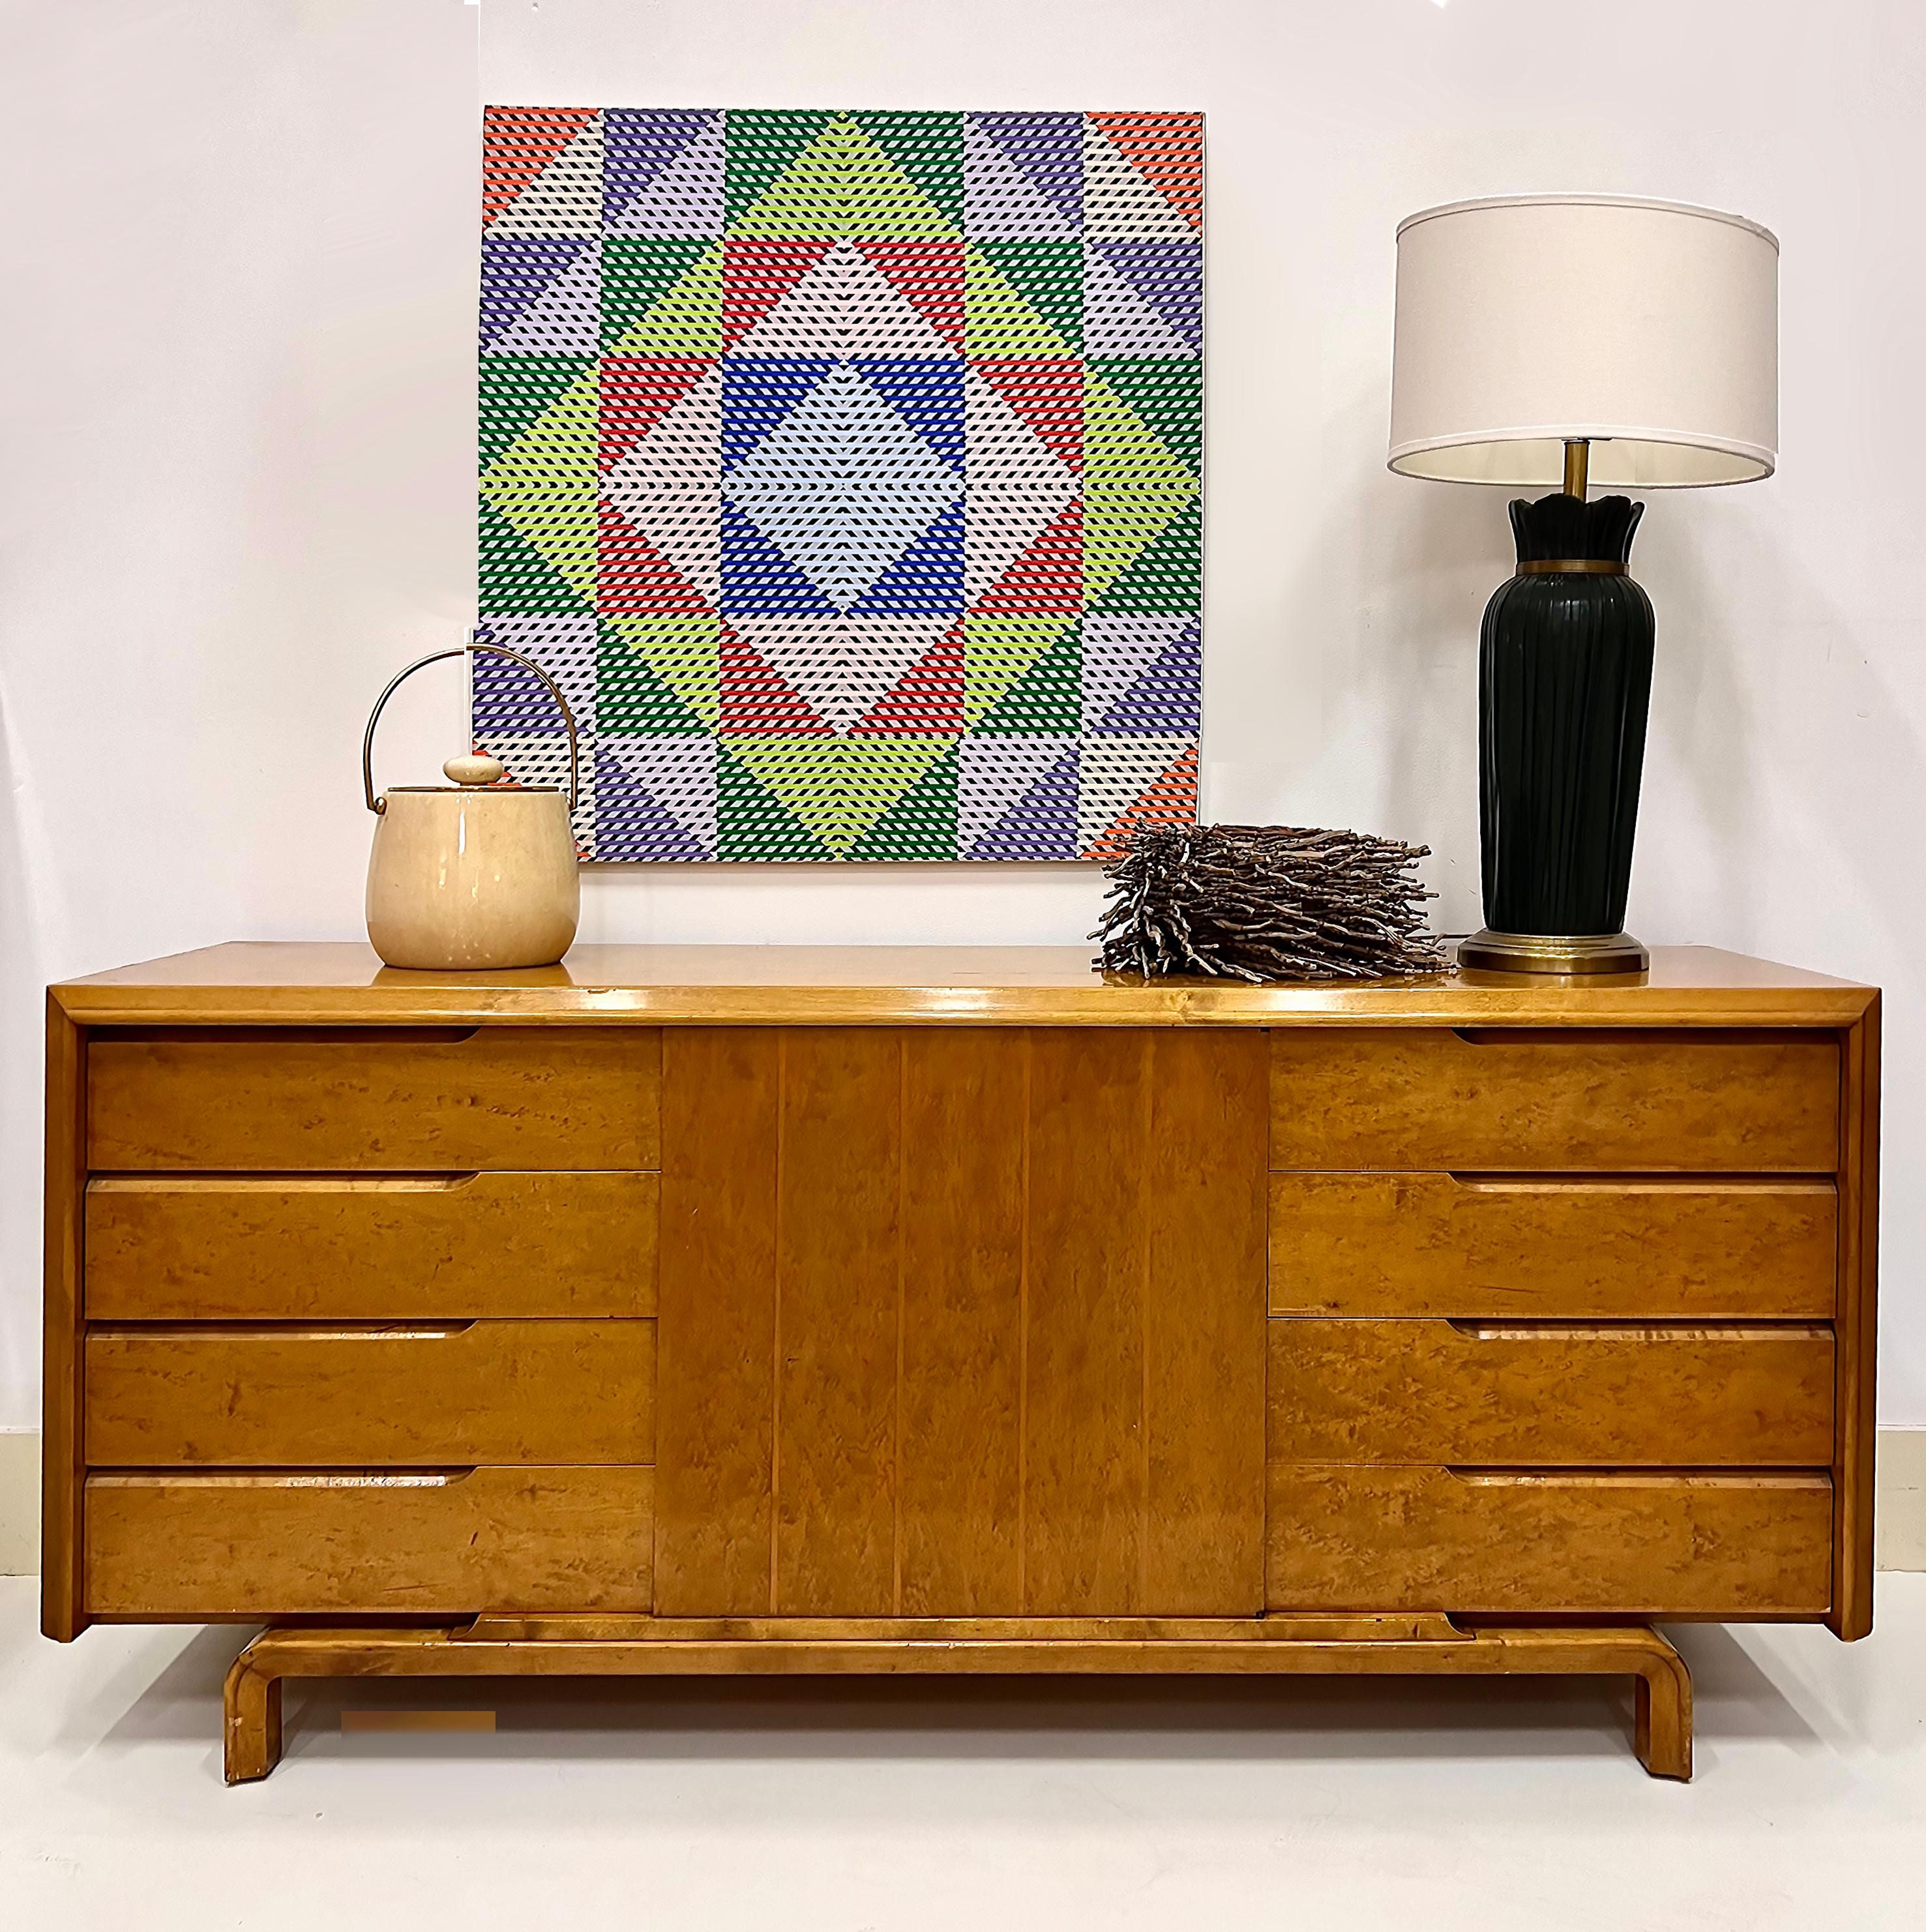  Swedish Mid-century Modern Edmond Spence Credenza with 9-drawers

Offered for sale vintage Swedish Modern Edmond Spence credenza that is substantially created in birch.  The credenza has 9 drawers with 3 being behind a center door. The cabinet has